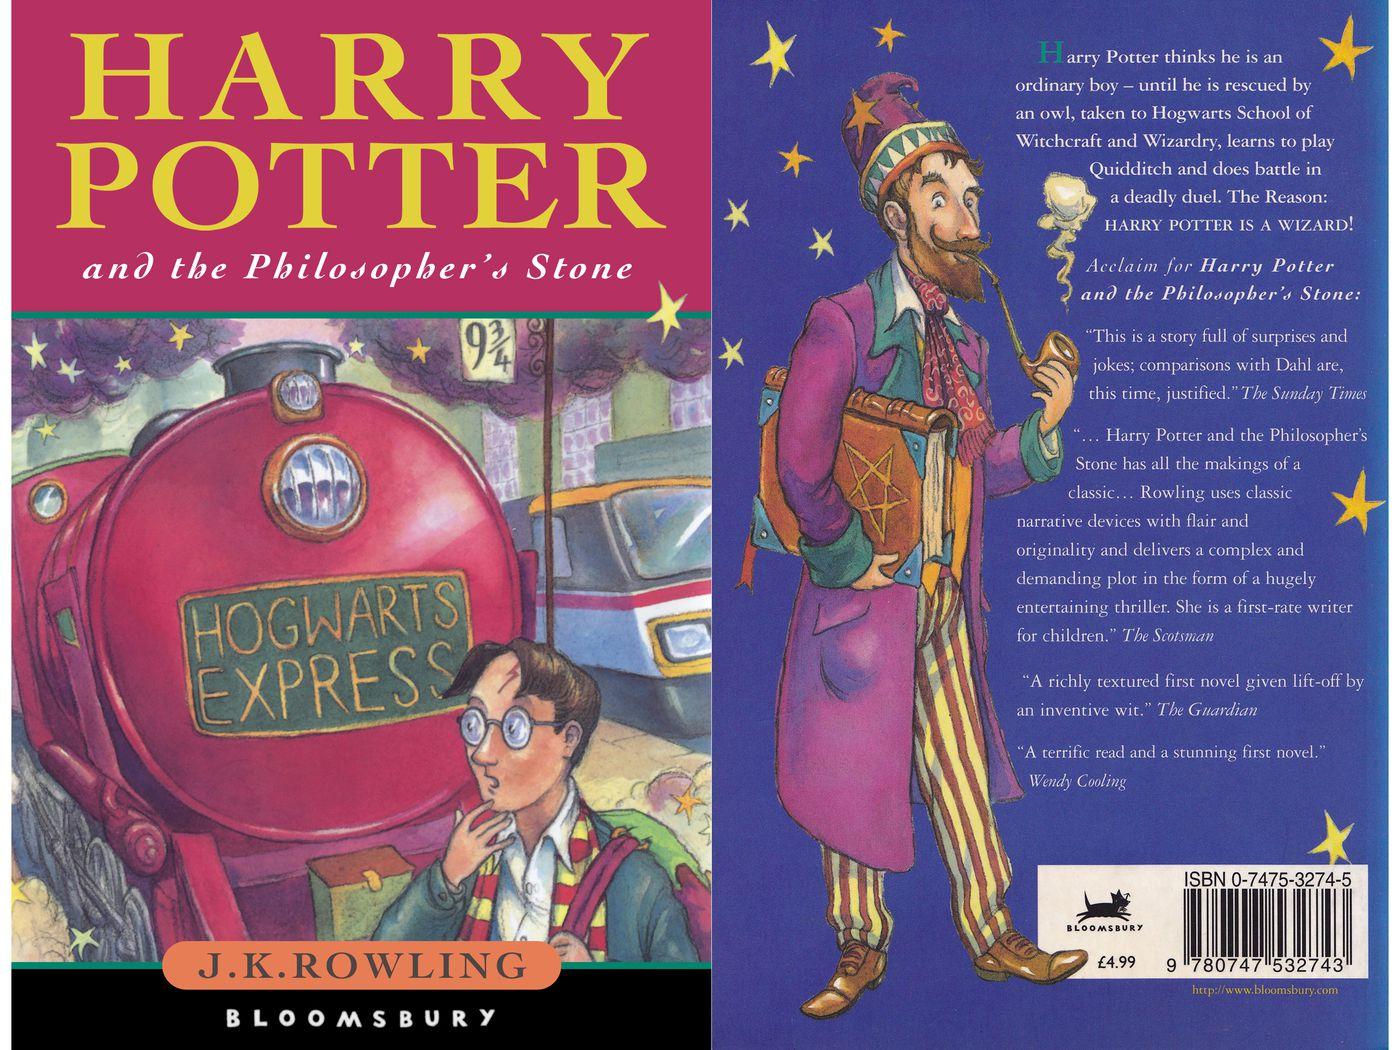 47 Top Best Writers Harry potter book night india for business